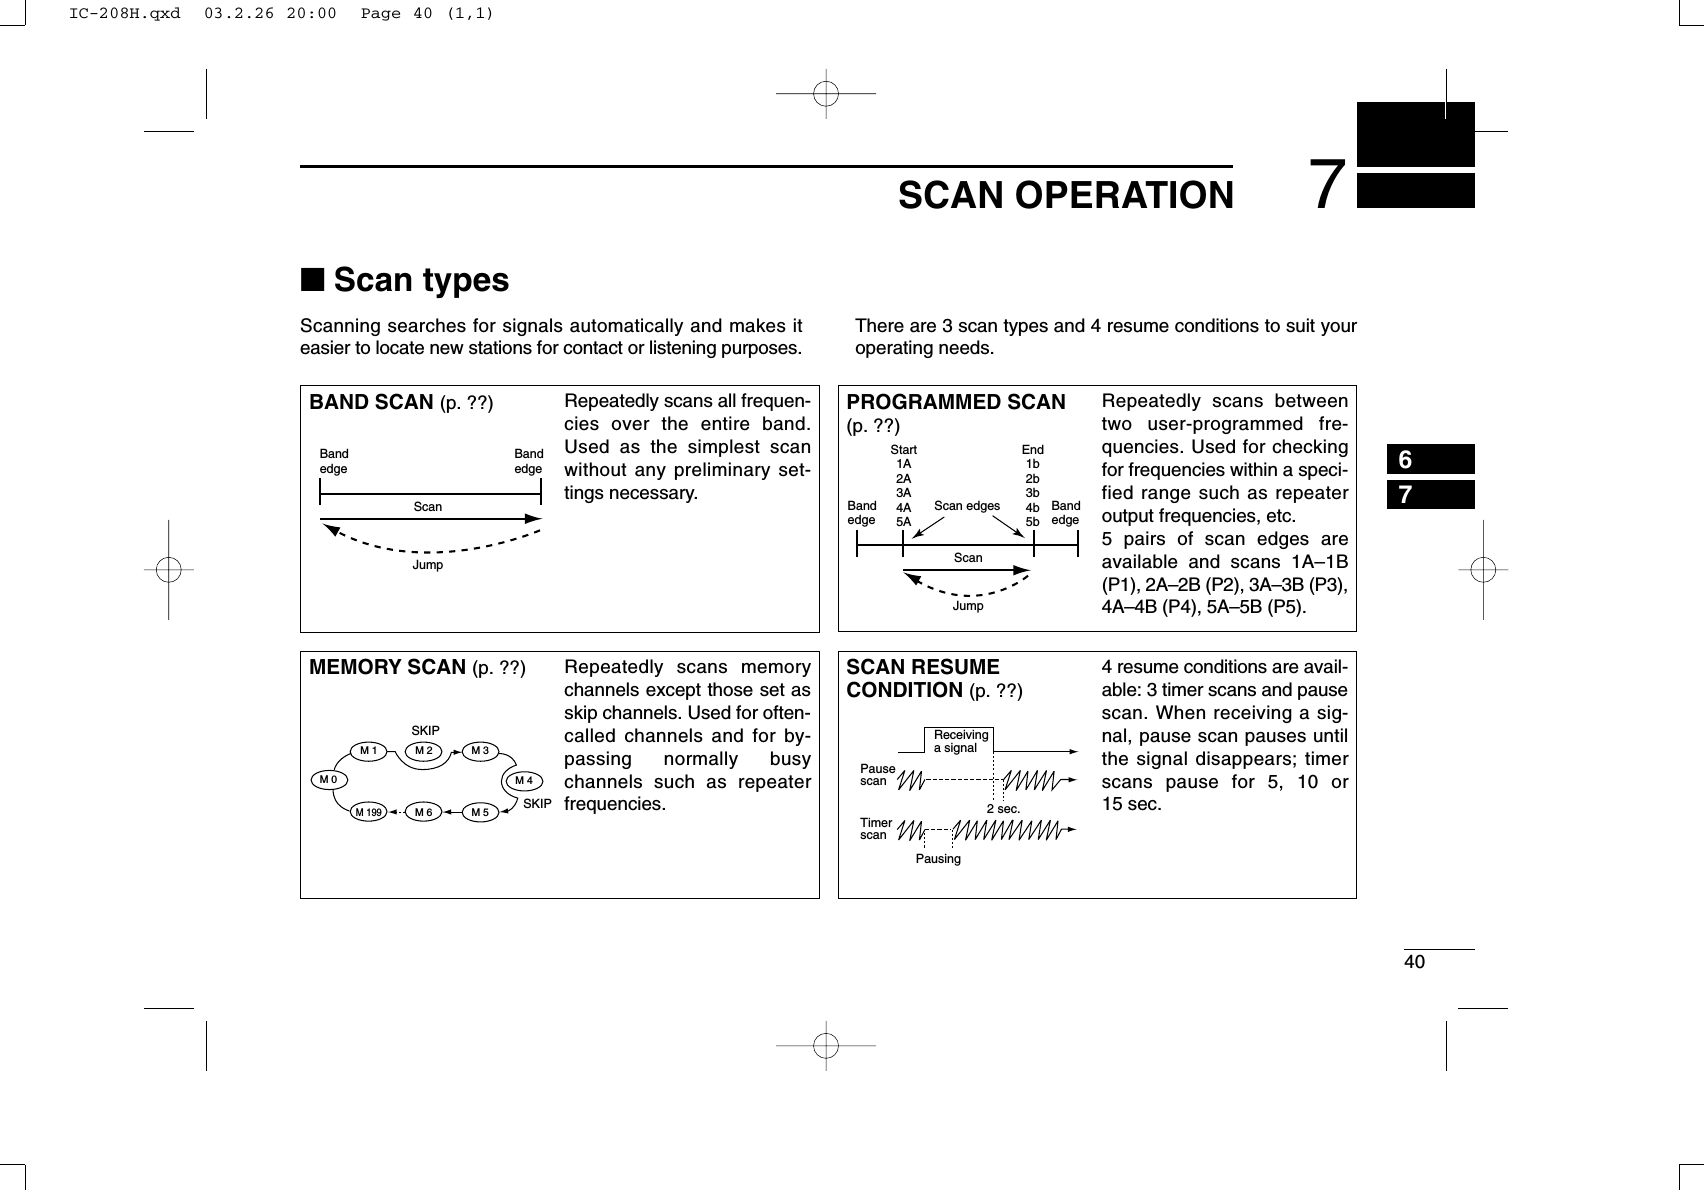 407SCAN OPERATION67■Scan typesScanning searches for signals automatically and makes iteasier to locate new stations for contact or listening purposes.There are 3 scan types and 4 resume conditions to suit youroperating needs.BAND SCAN (p. ??) Repeatedly scans all frequen-cies over the entire band.Used as the simplest scanwithout any preliminary set-tings necessary.BandedgeBandedgeScanJumpPROGRAMMED SCAN(p. ??)Repeatedly scans betweentwo user-programmed fre-quencies. Used for checkingfor frequencies within a speci-fied range such as repeateroutput frequencies, etc. 5 pairs of scan edges areavailable and scans 1A–1B(P1), 2A–2B (P2), 3A–3B (P3),4A–4B (P4), 5A–5B (P5).BandedgeBandedgeScan edgesScanJump1A2A3A4A5A1b2b3b4b5bStart EndMEMORY SCAN (p. ??) Repeatedly scans memorychannels except those set asskip channels. Used for often-called channels and for by-passing normally busychannels such as repeaterfrequencies.SKIPSKIPM 0 M 4M 1 M 2 M 3M 5M 199M 6SCAN RESUMECONDITION (p. ??)4 resume conditions are avail-able: 3 timer scans and pausescan. When receiving a sig-nal, pause scan pauses untilthe signal disappears; timerscans pause for 5, 10 or15 sec.PausescanReceivinga signalTimerscanPausing2 sec.IC-208H.qxd  03.2.26 20:00  Page 40 (1,1)